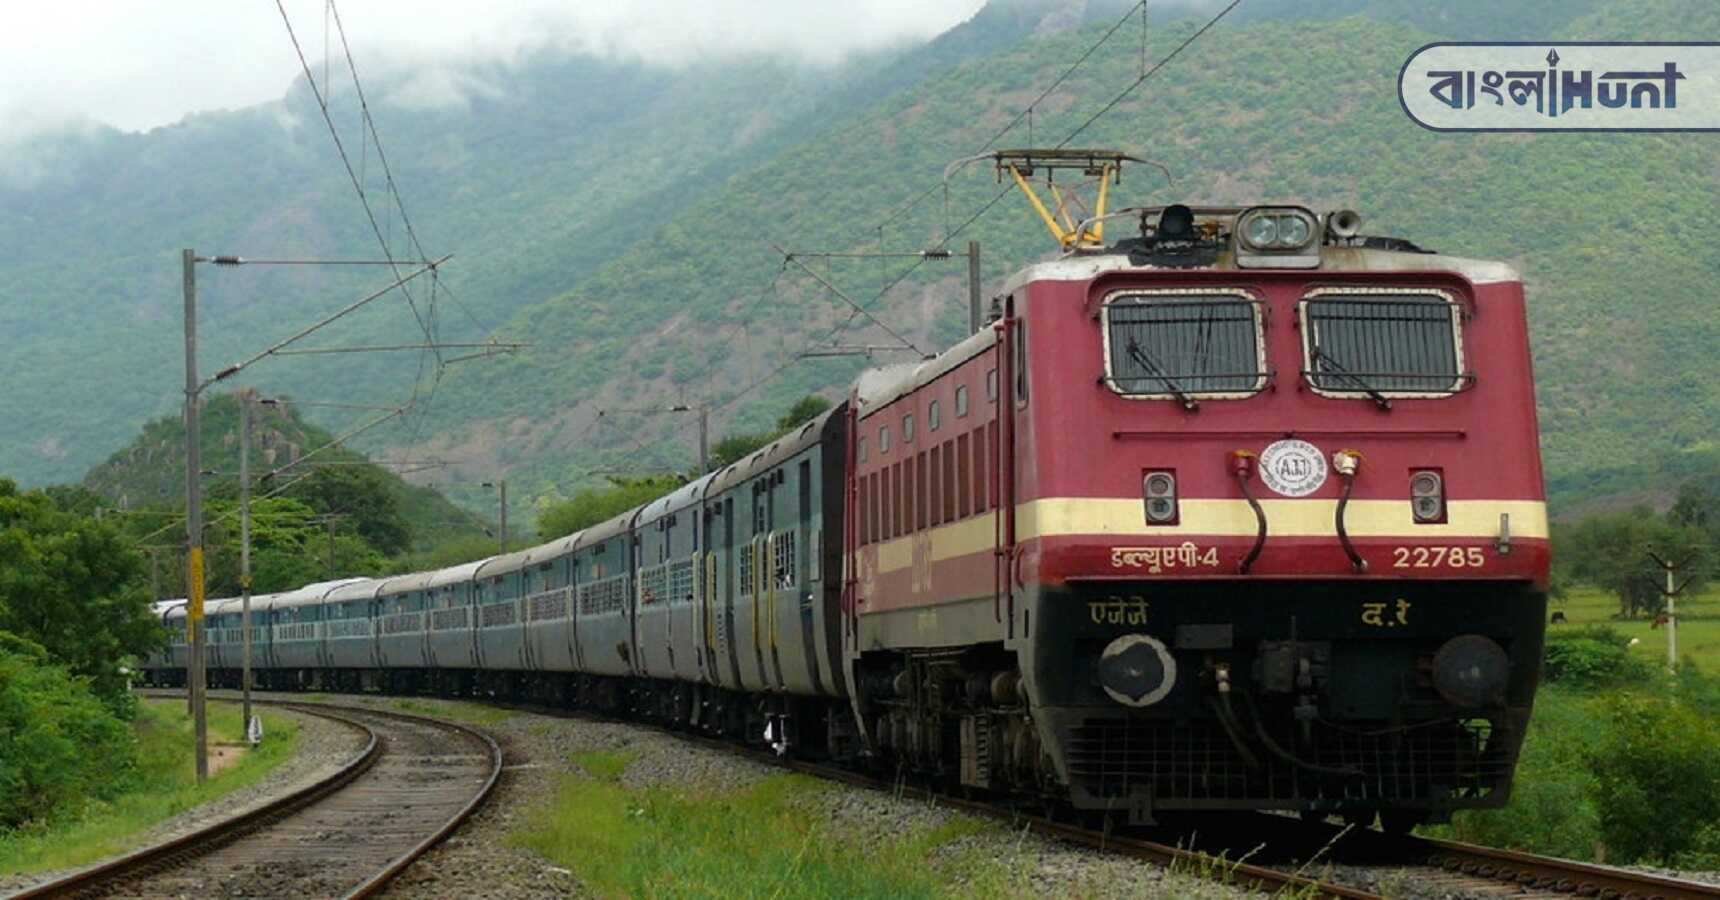 All mail, express trains will be launched soon